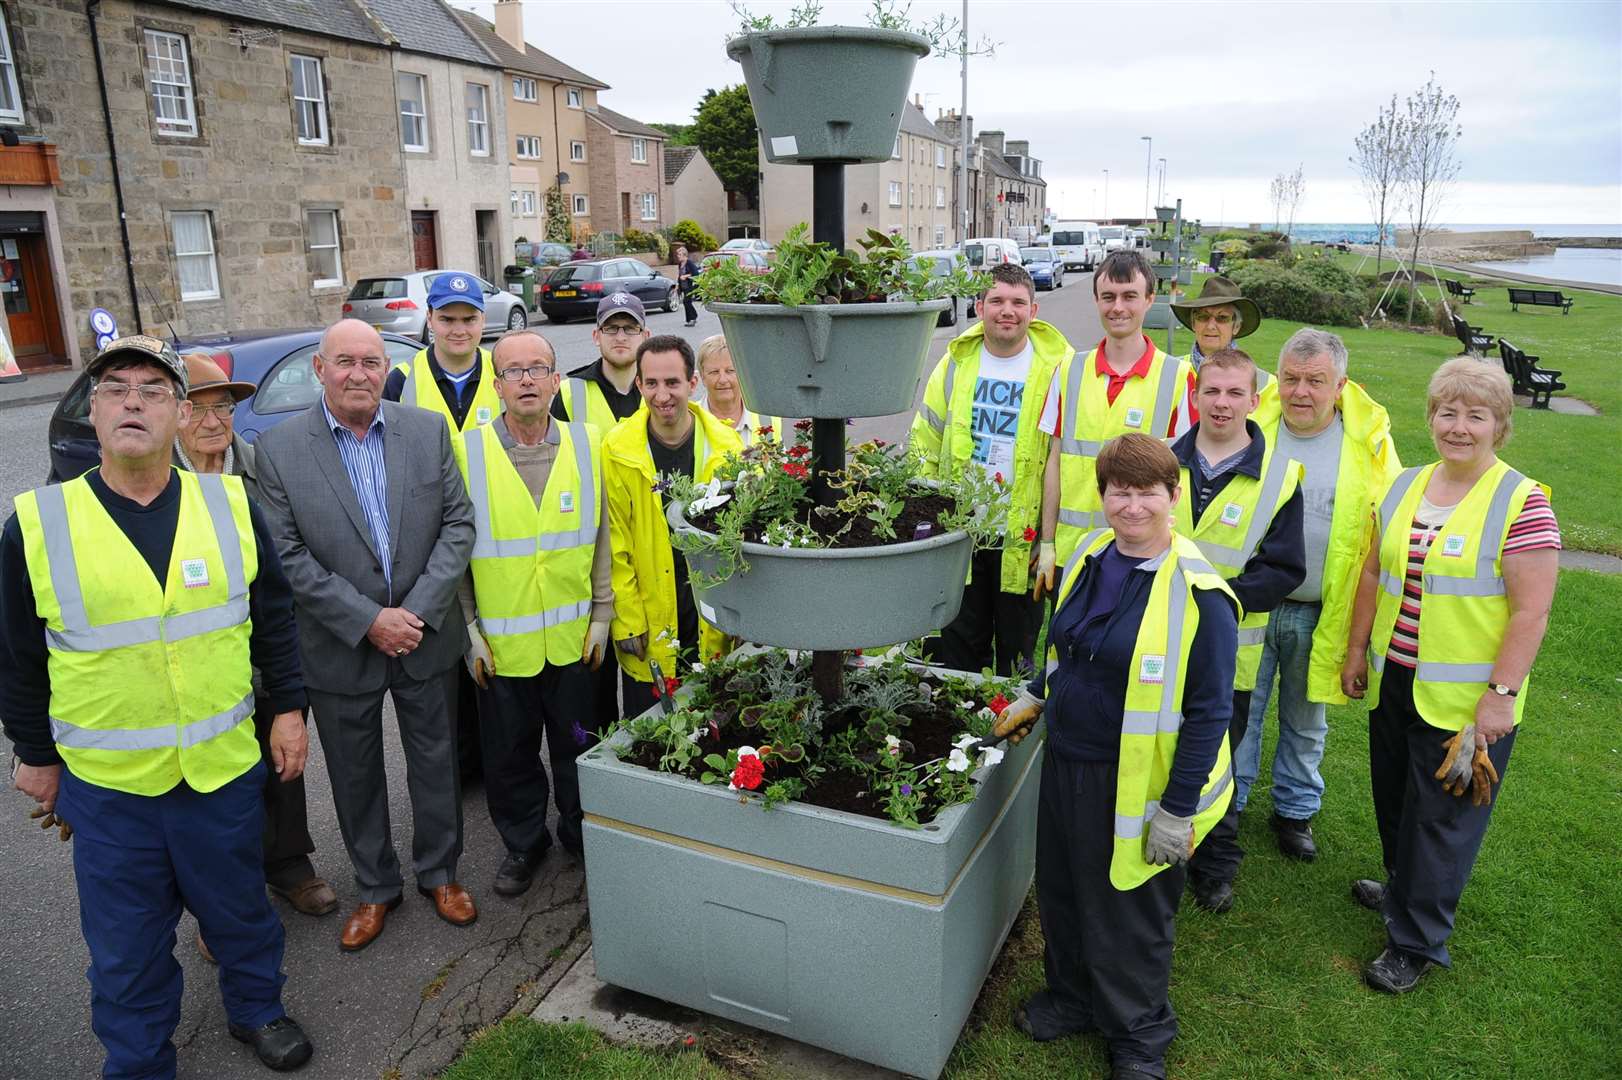 Mike, third from left, celebrating some of the new floral displays in the town in 2014.